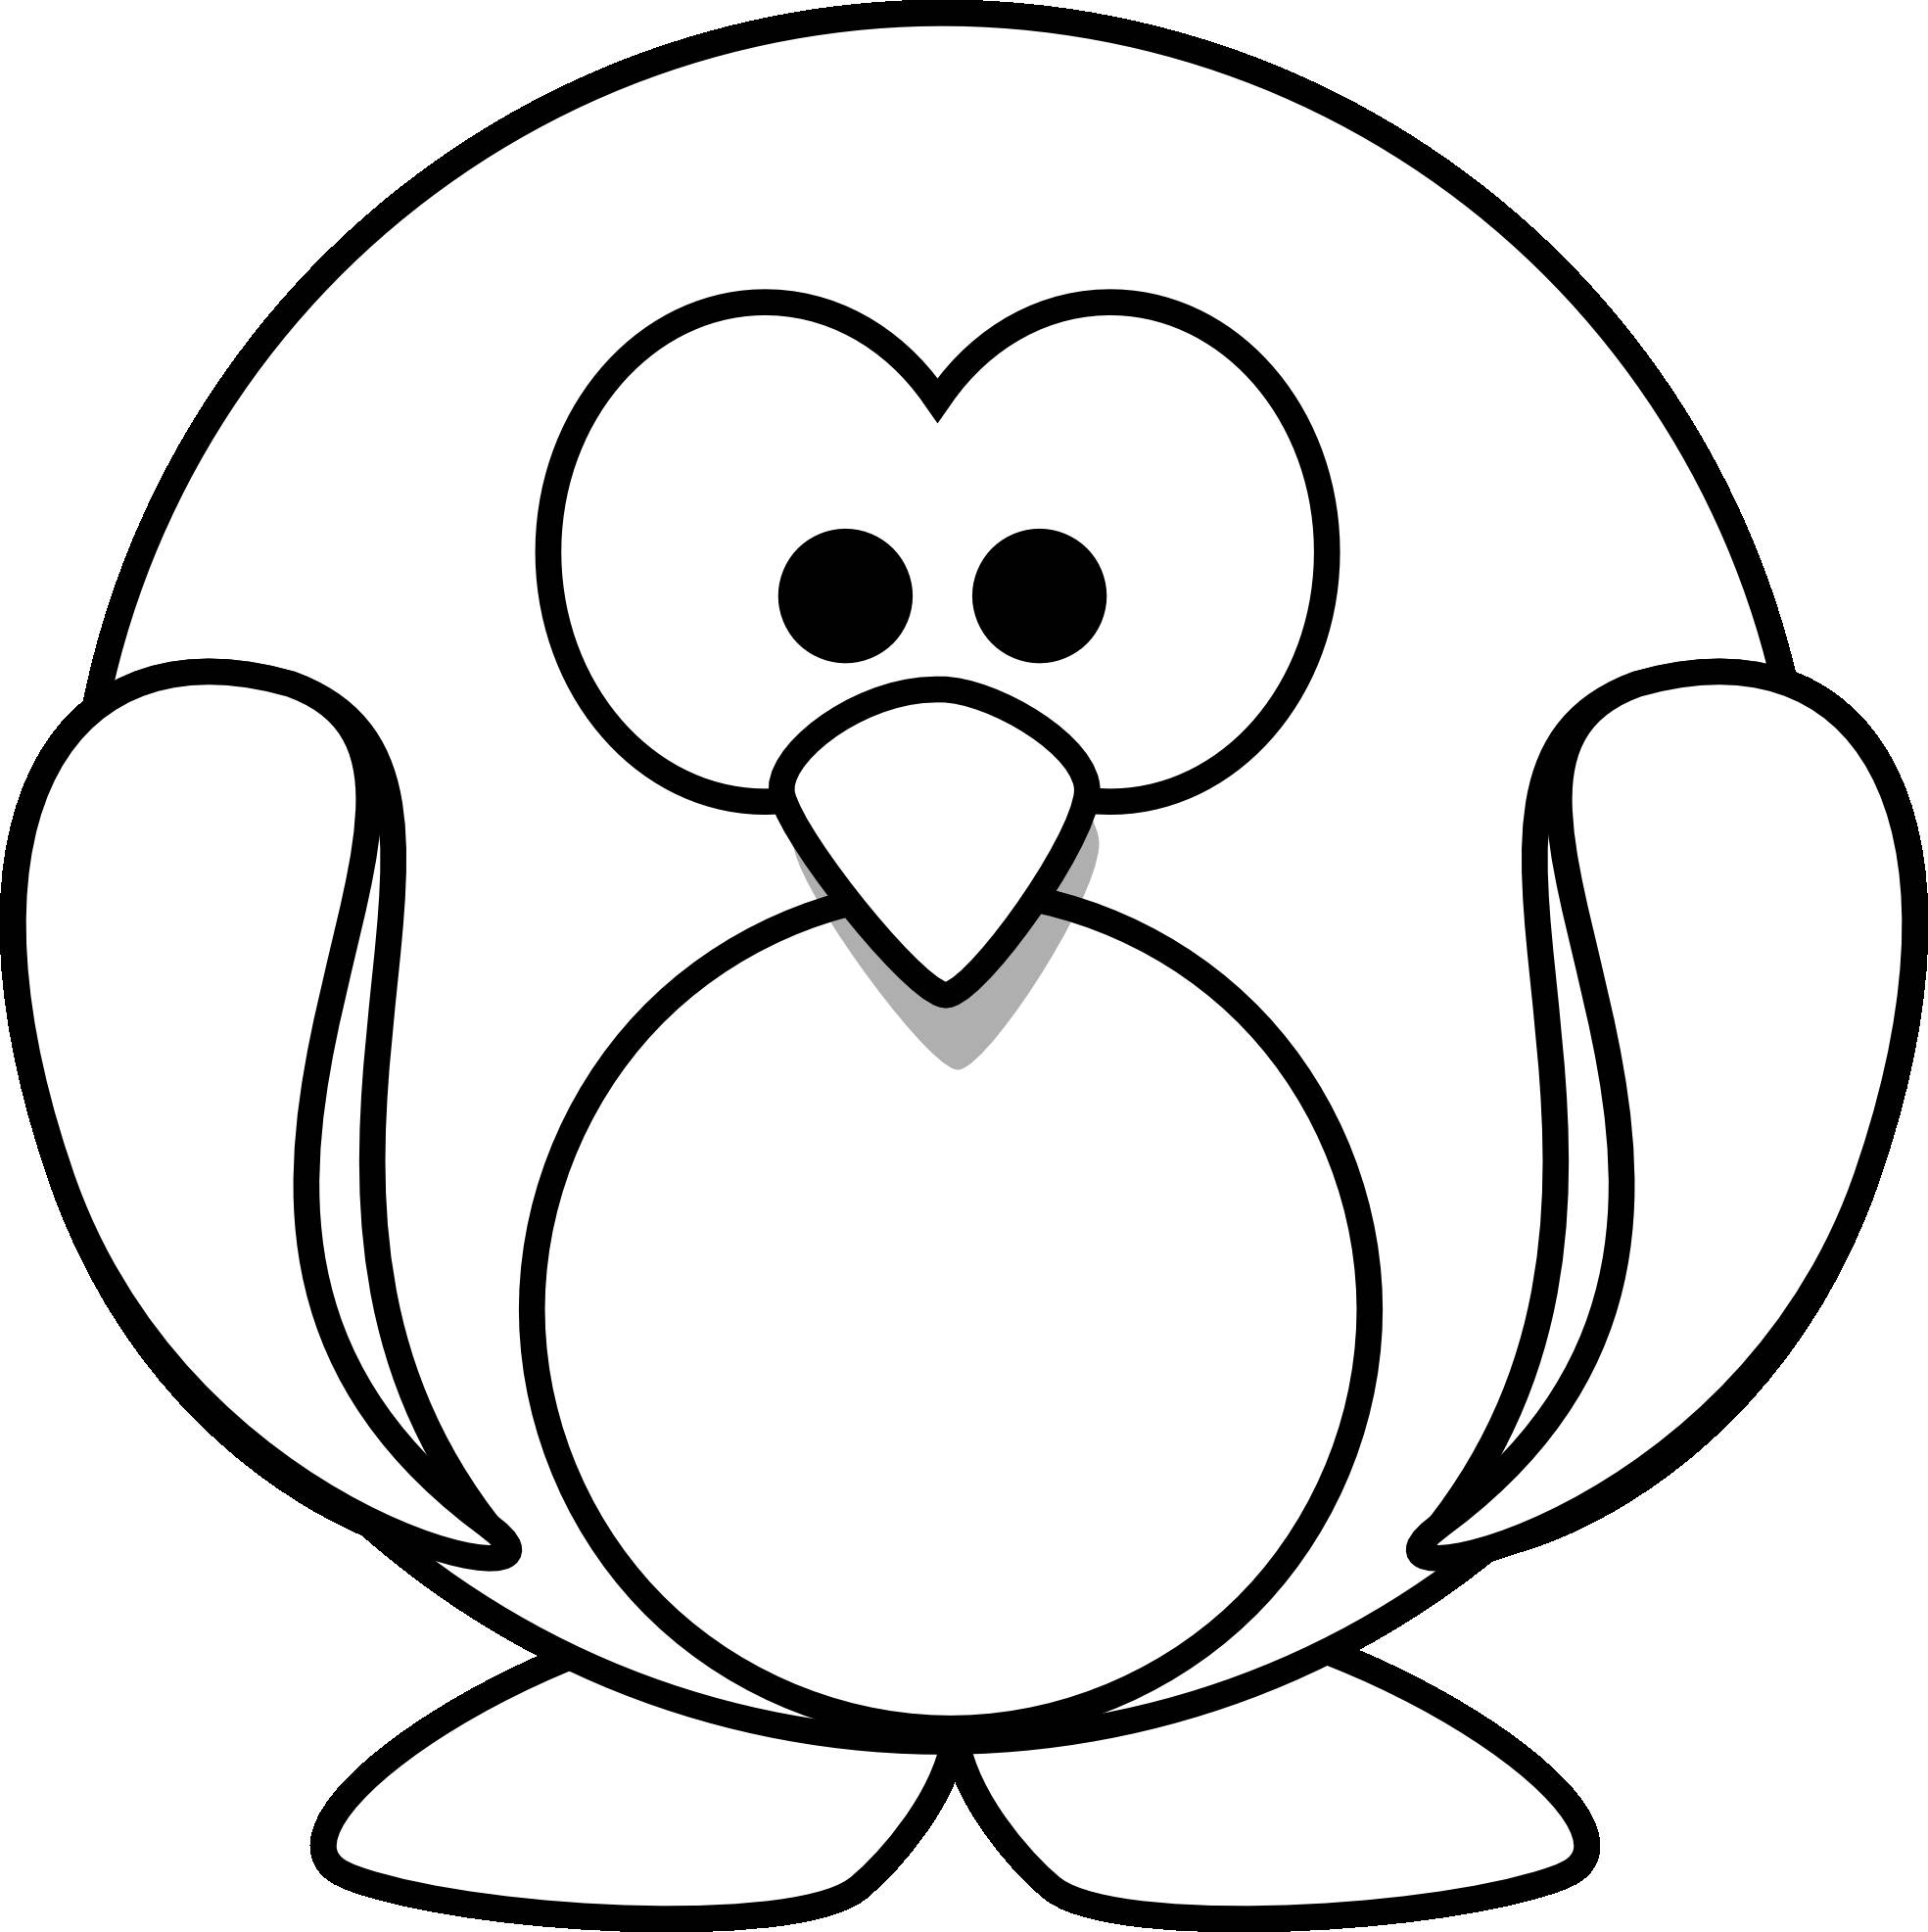 Gorgeous penguin coloring page